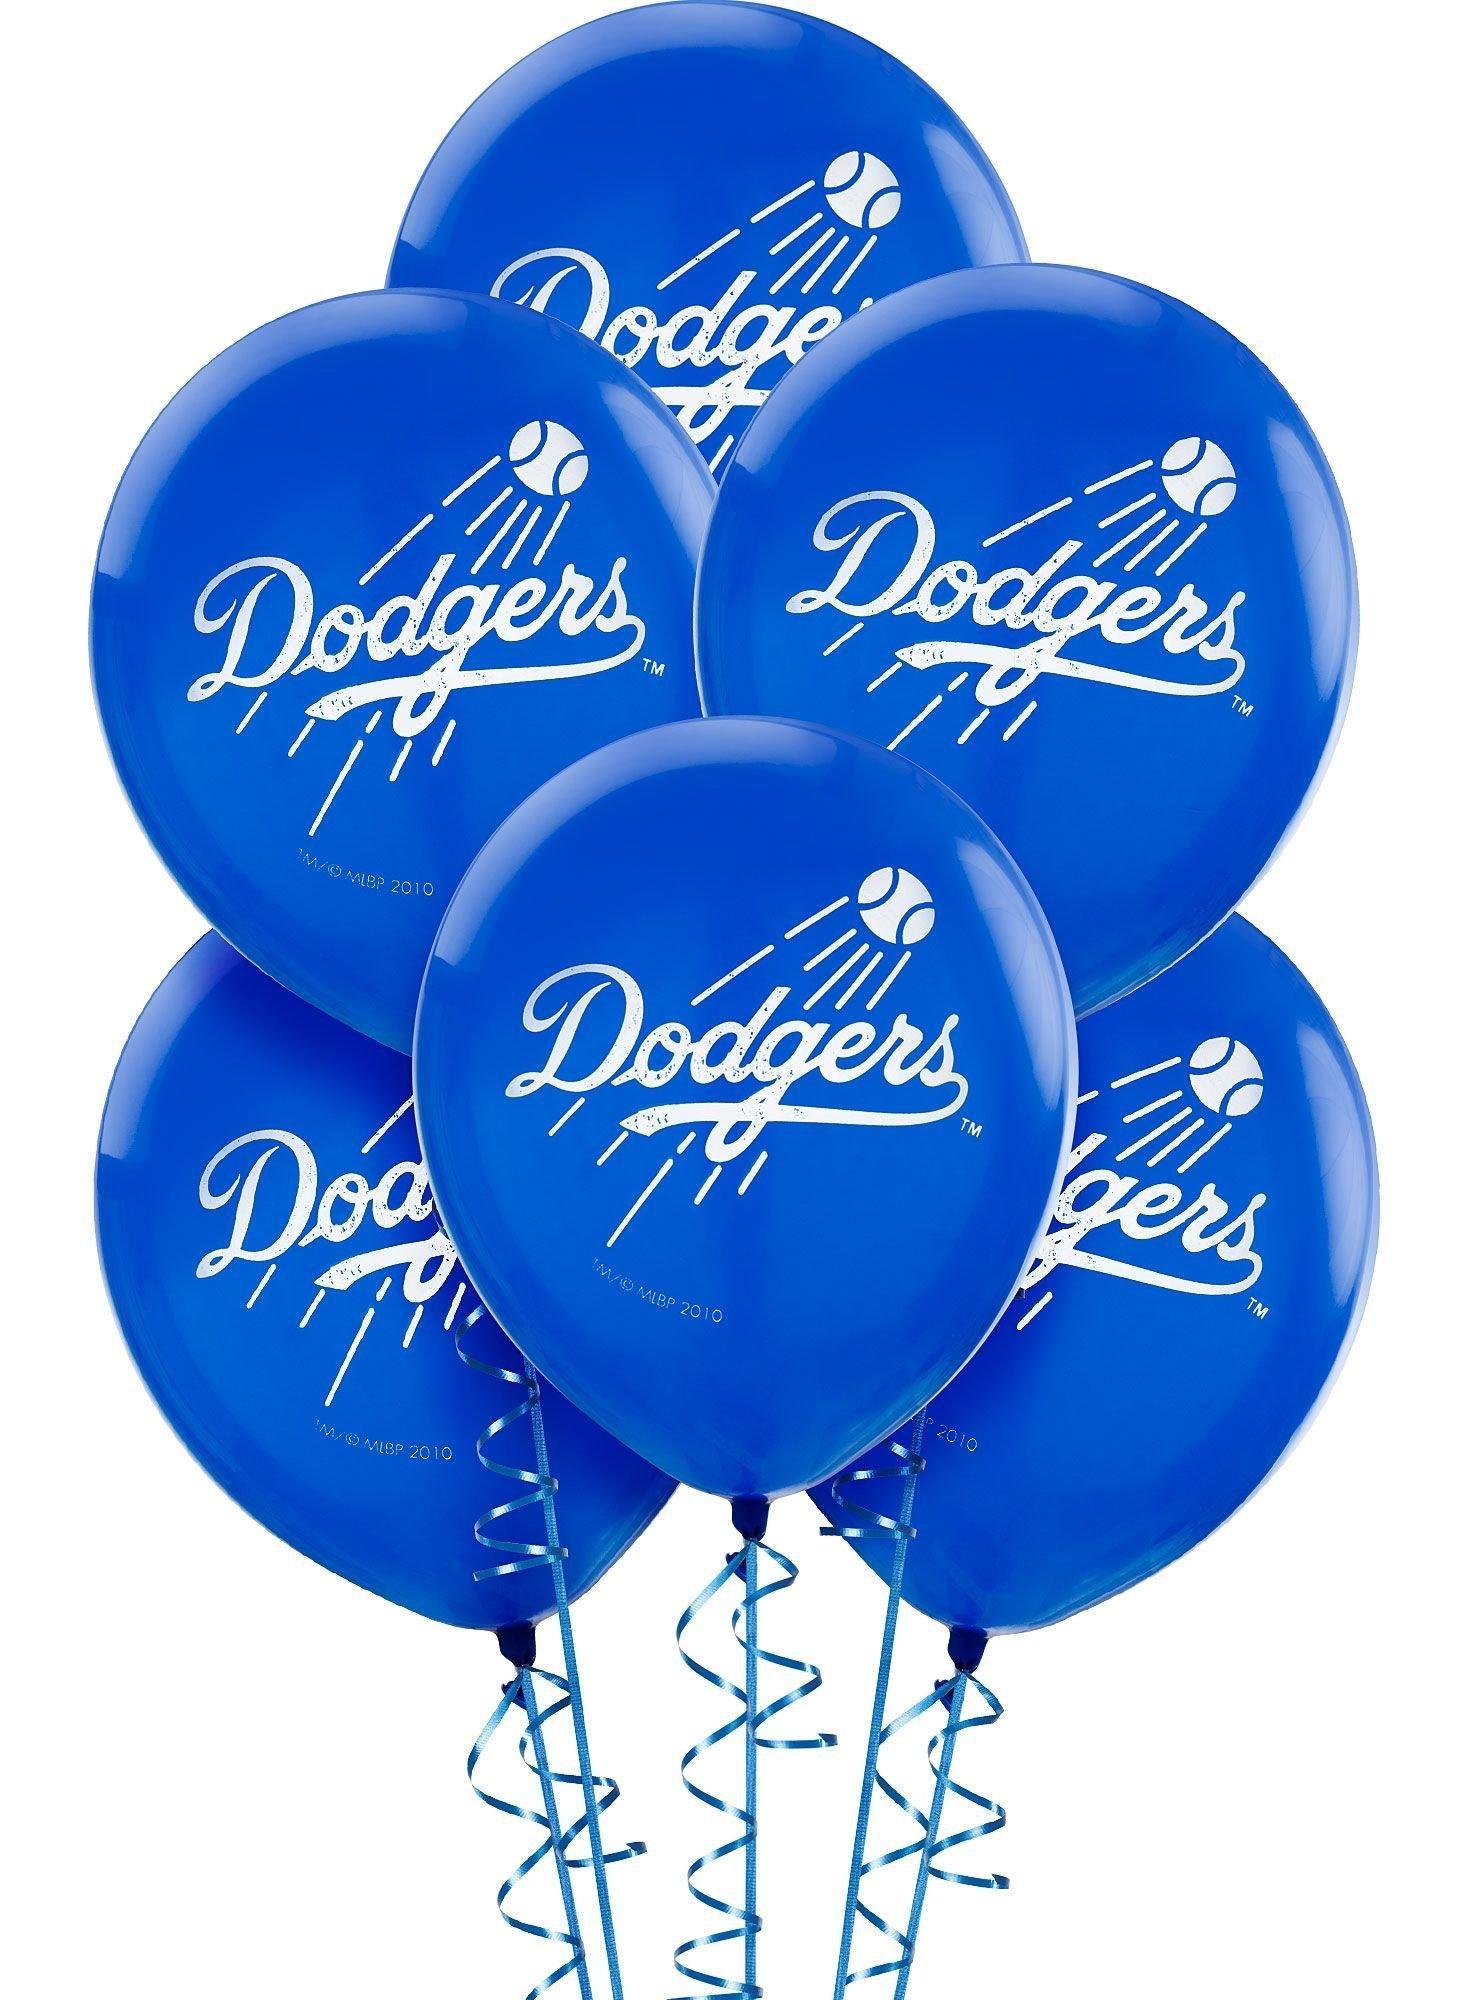 Super Los Angeles Dodgers Party Kit for 36 Guests